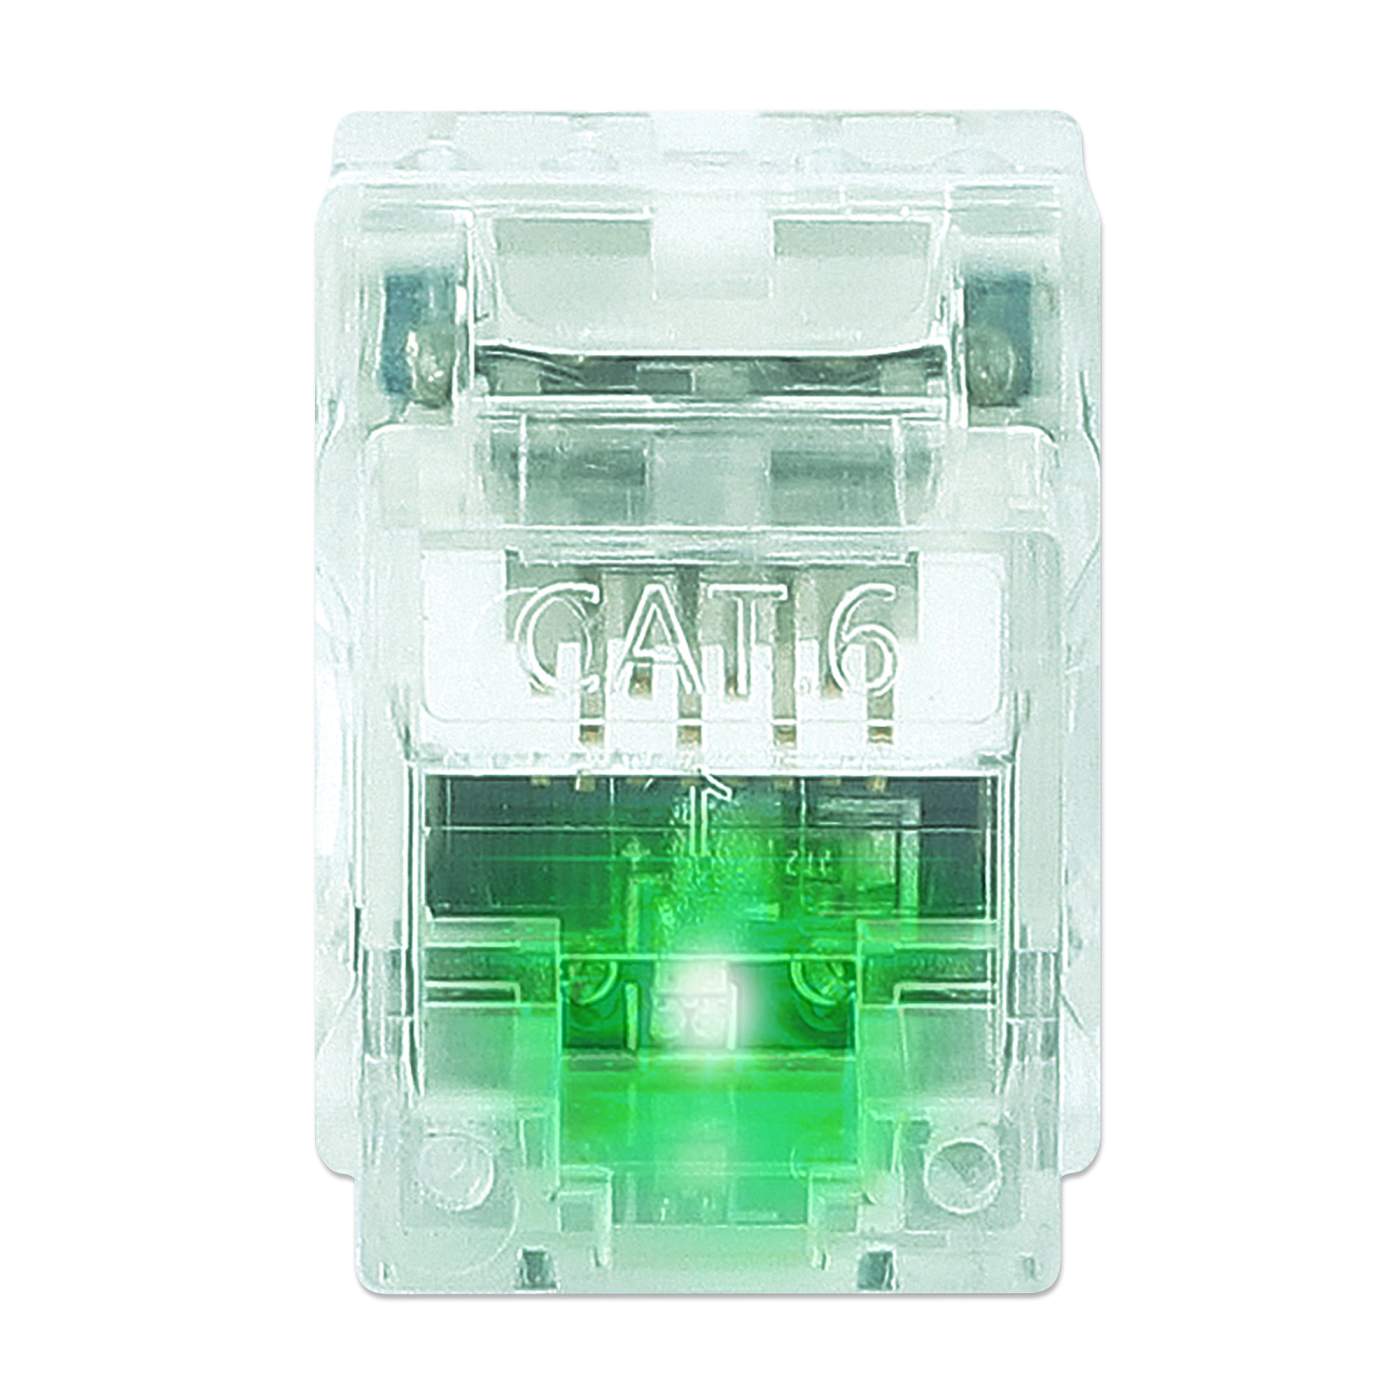 Cat6 Punch-Down Keystone Jack with LED, Transparent, 25-Pack Image 6